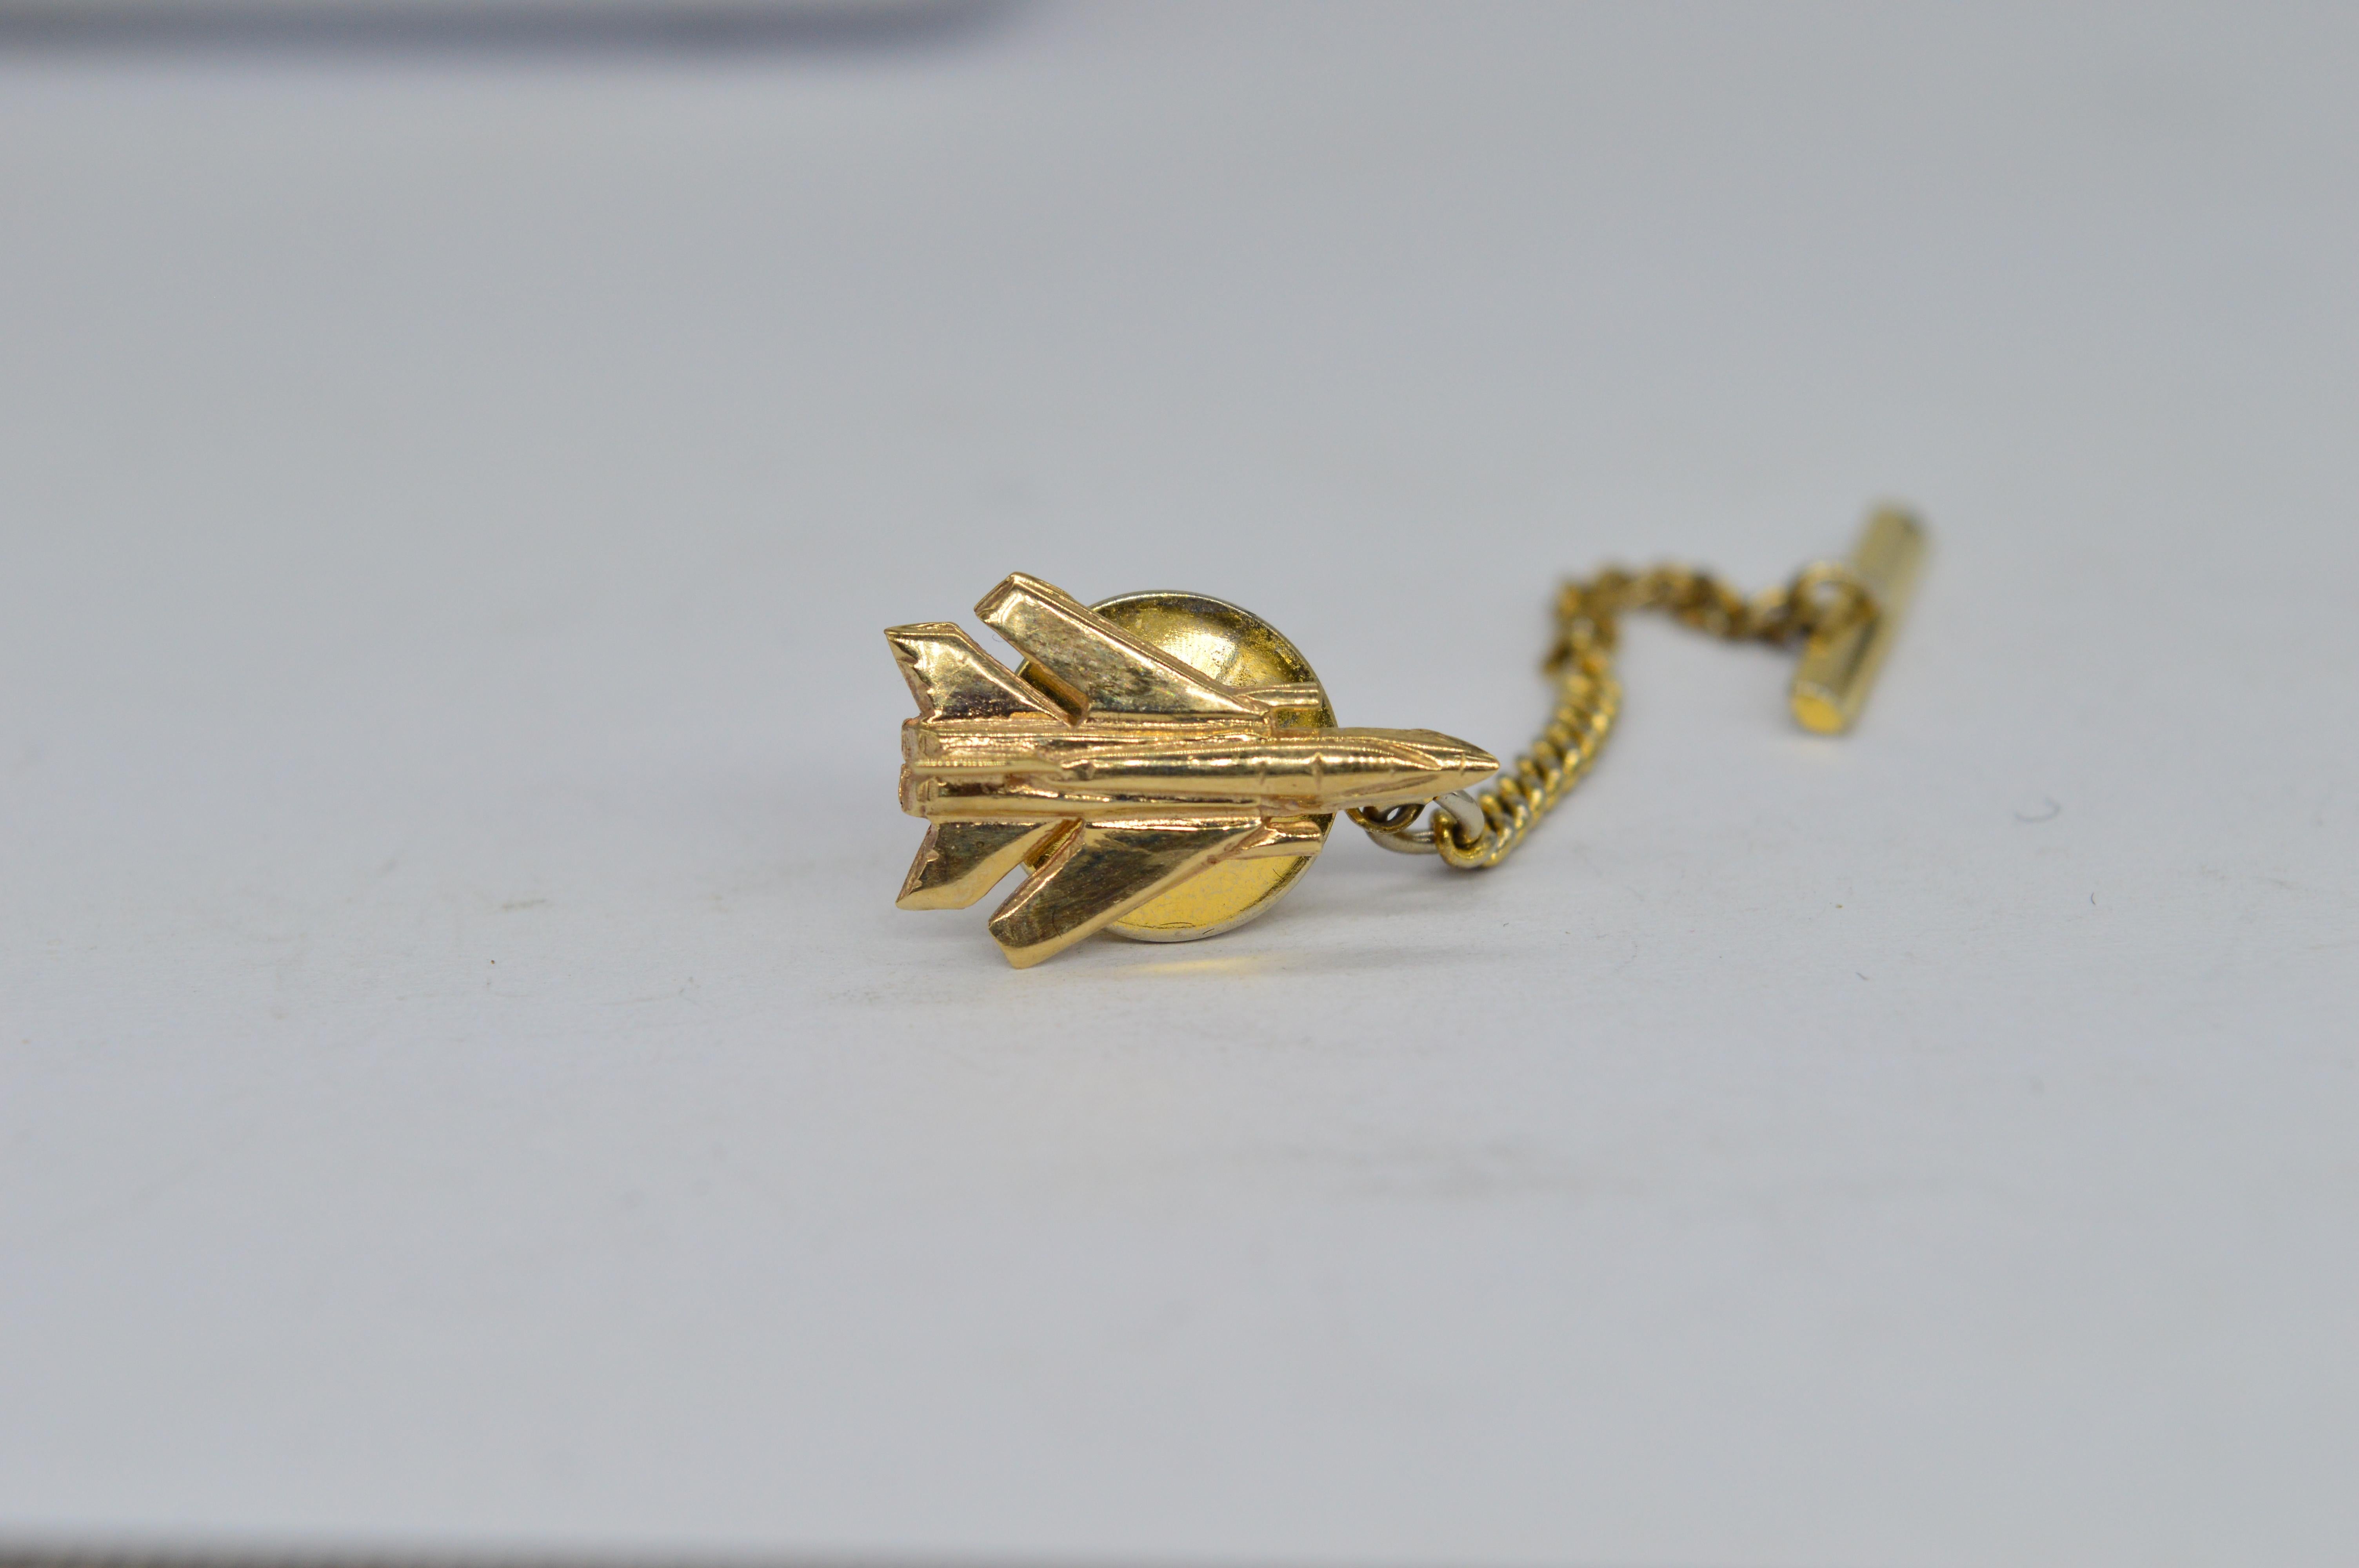 A vintage 9ct gold Lapel pin with a Harrier Jet design

Featuring a base metal lapel pin back

We have sold to the set of Hit shows like Peaky Blinders and Outlander as well as to Buckingham Palace so our items are truly fit for royalty.

Through a